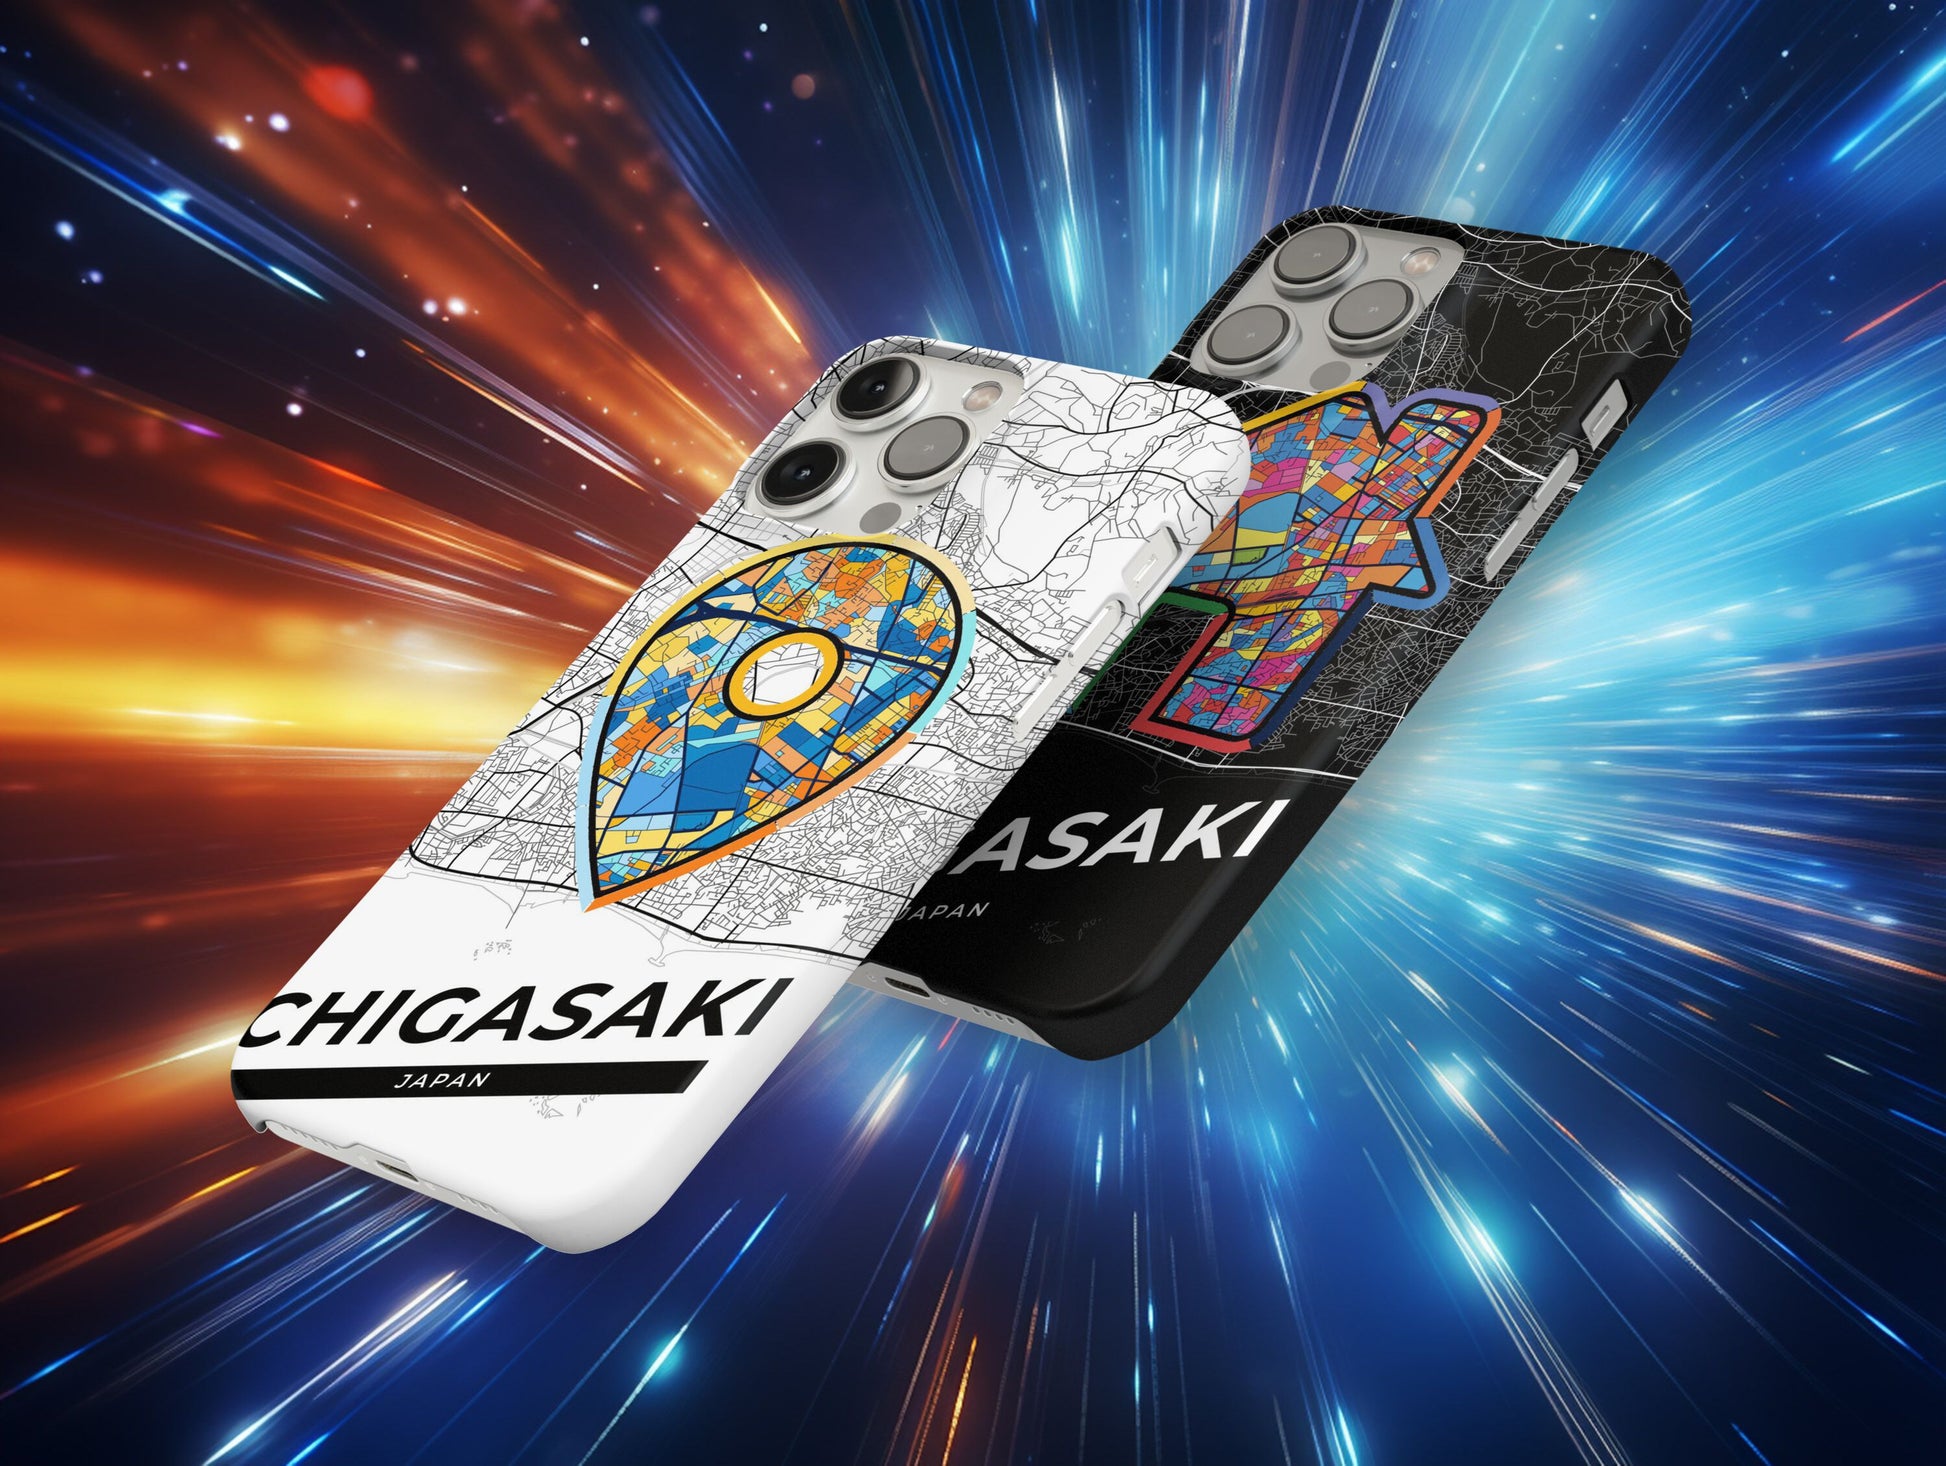 Chigasaki Japan slim phone case with colorful icon. Birthday, wedding or housewarming gift. Couple match cases.